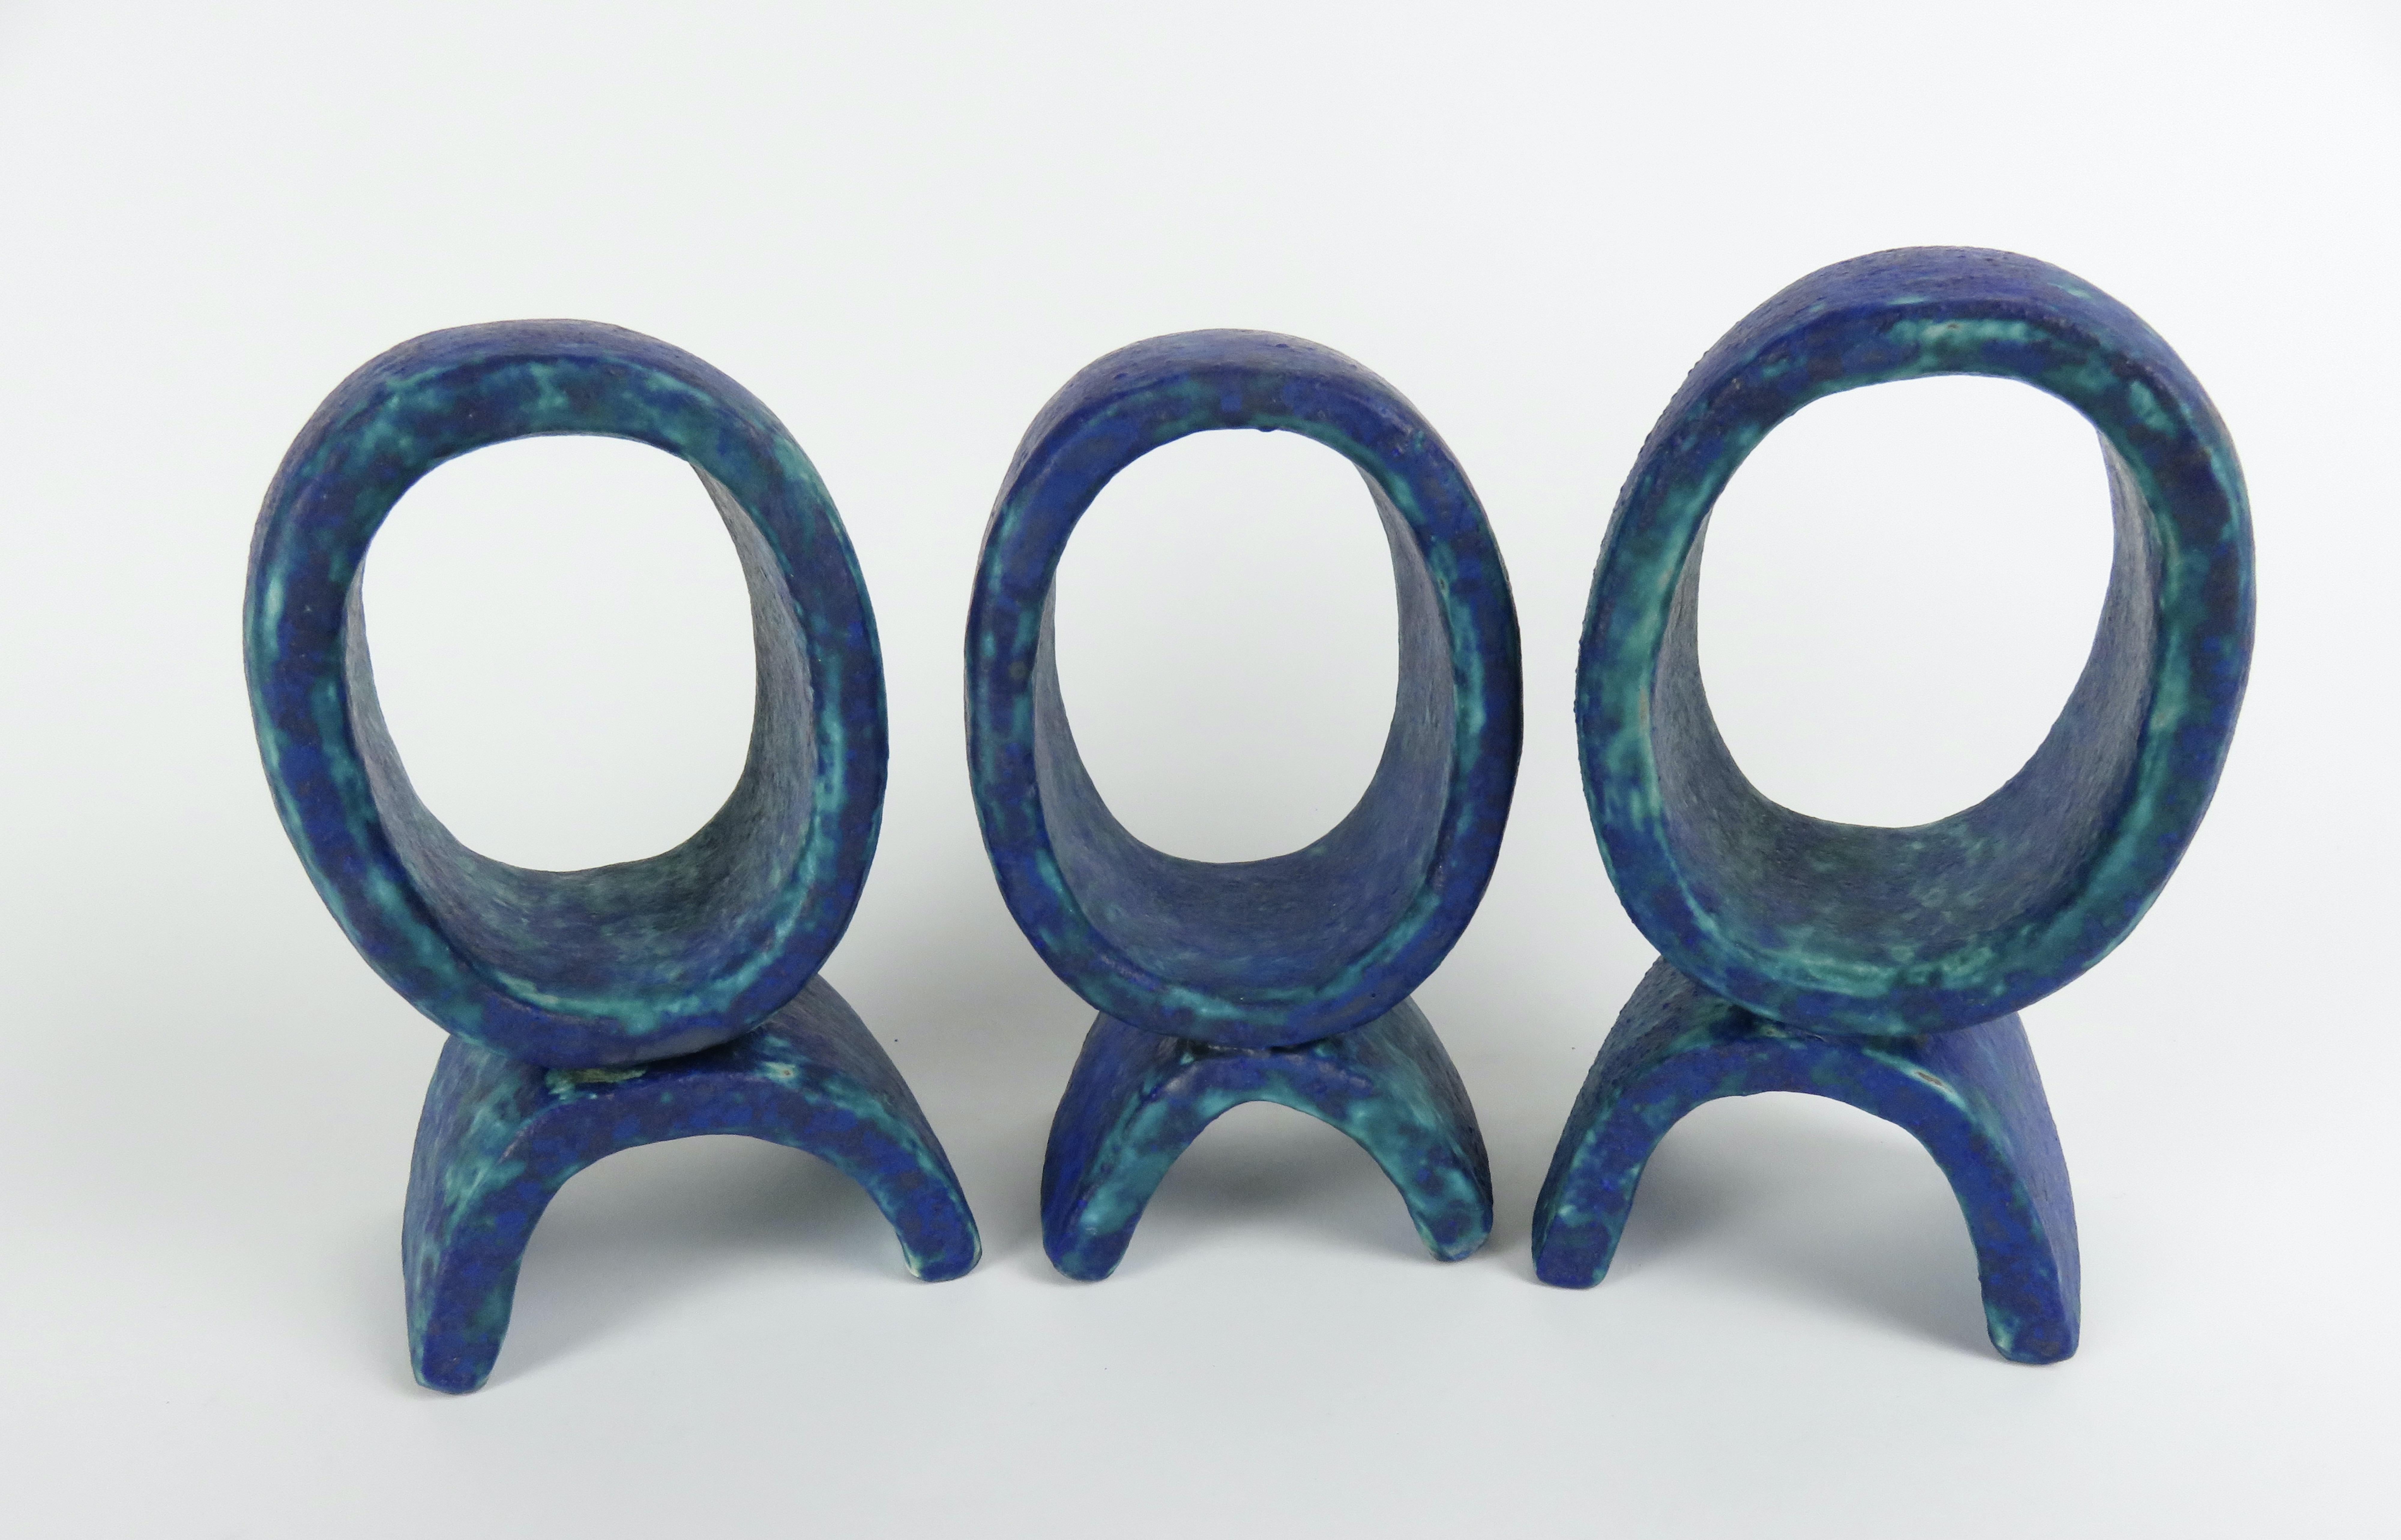 Mottled Turquoise and Deep Blue, 3 Ceramic Totems, Single Rings on Curved Legs For Sale 1